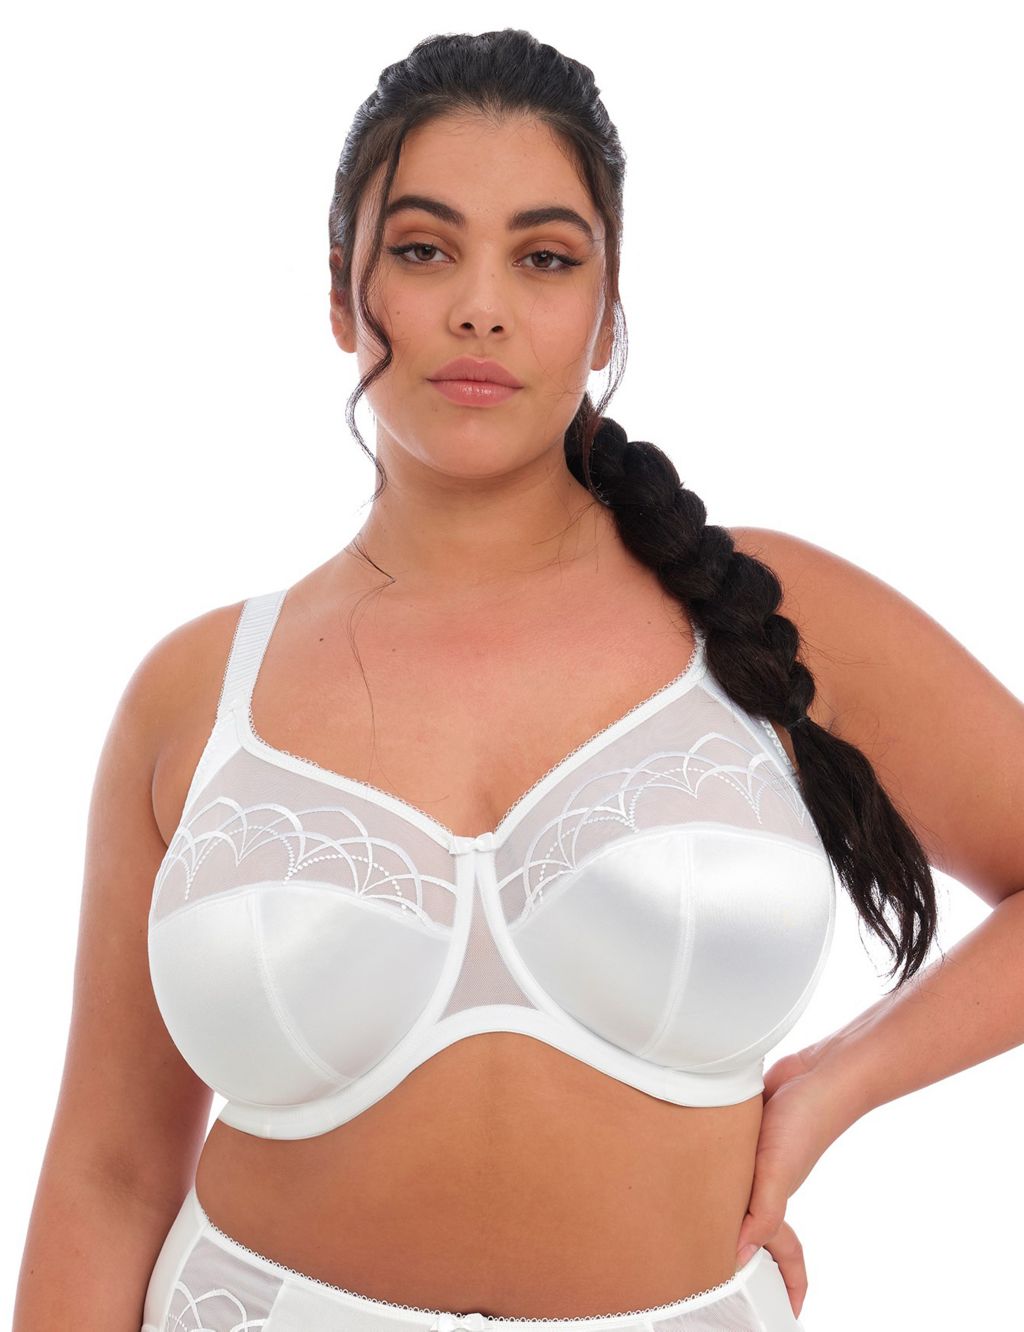 Cate Wired Full Cup Bra DD-K image 2